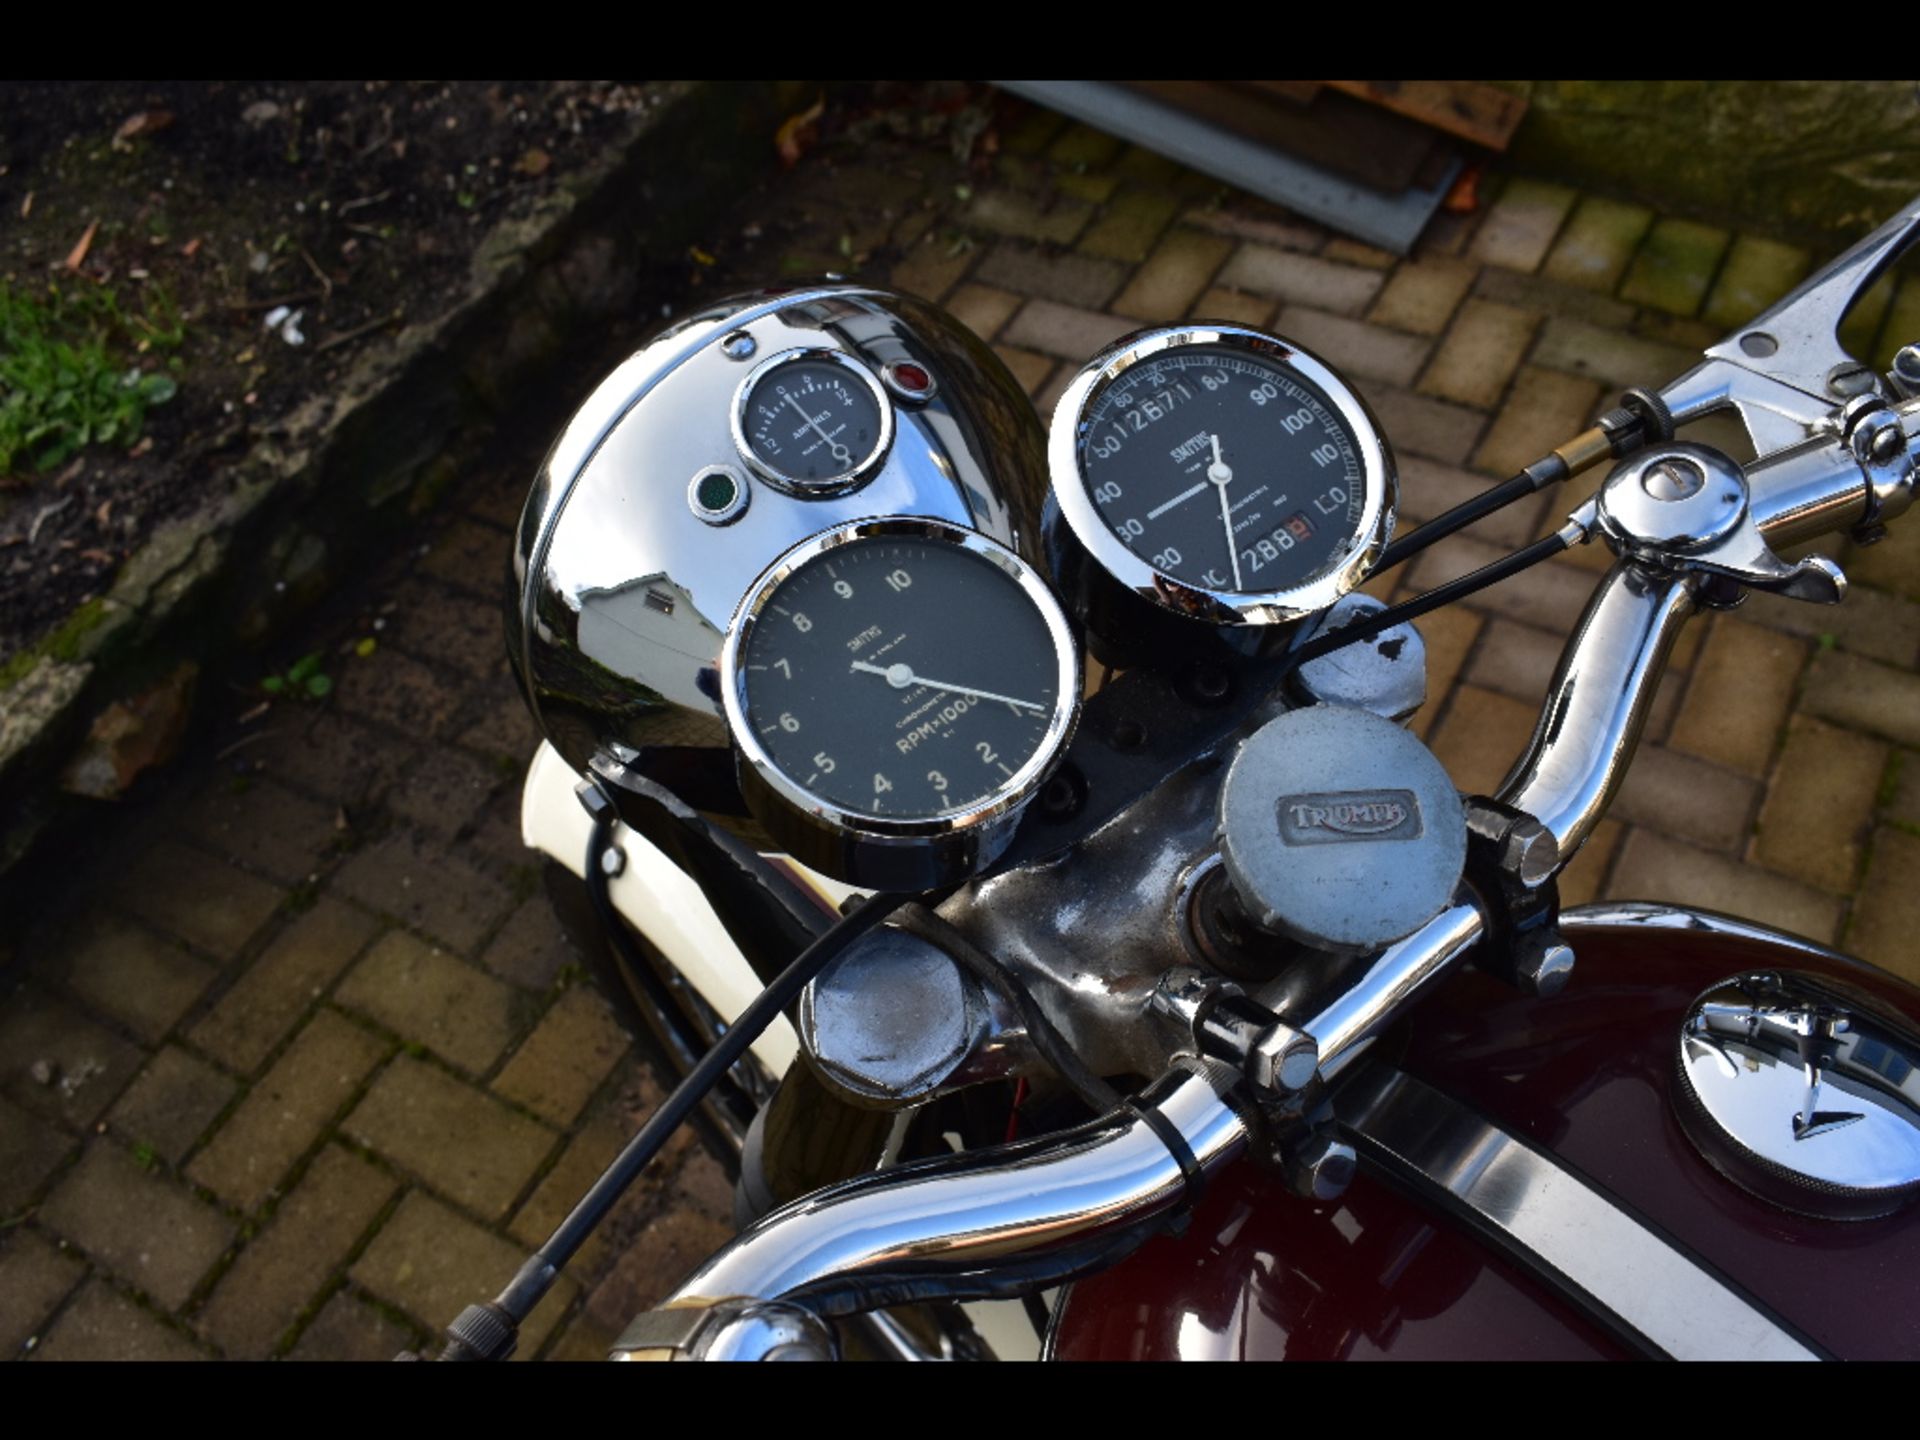 A 1960 Triumph Thunderbird, registration number YSY 435, frame number 6TD3747, engine number 6T3747. - Image 3 of 6